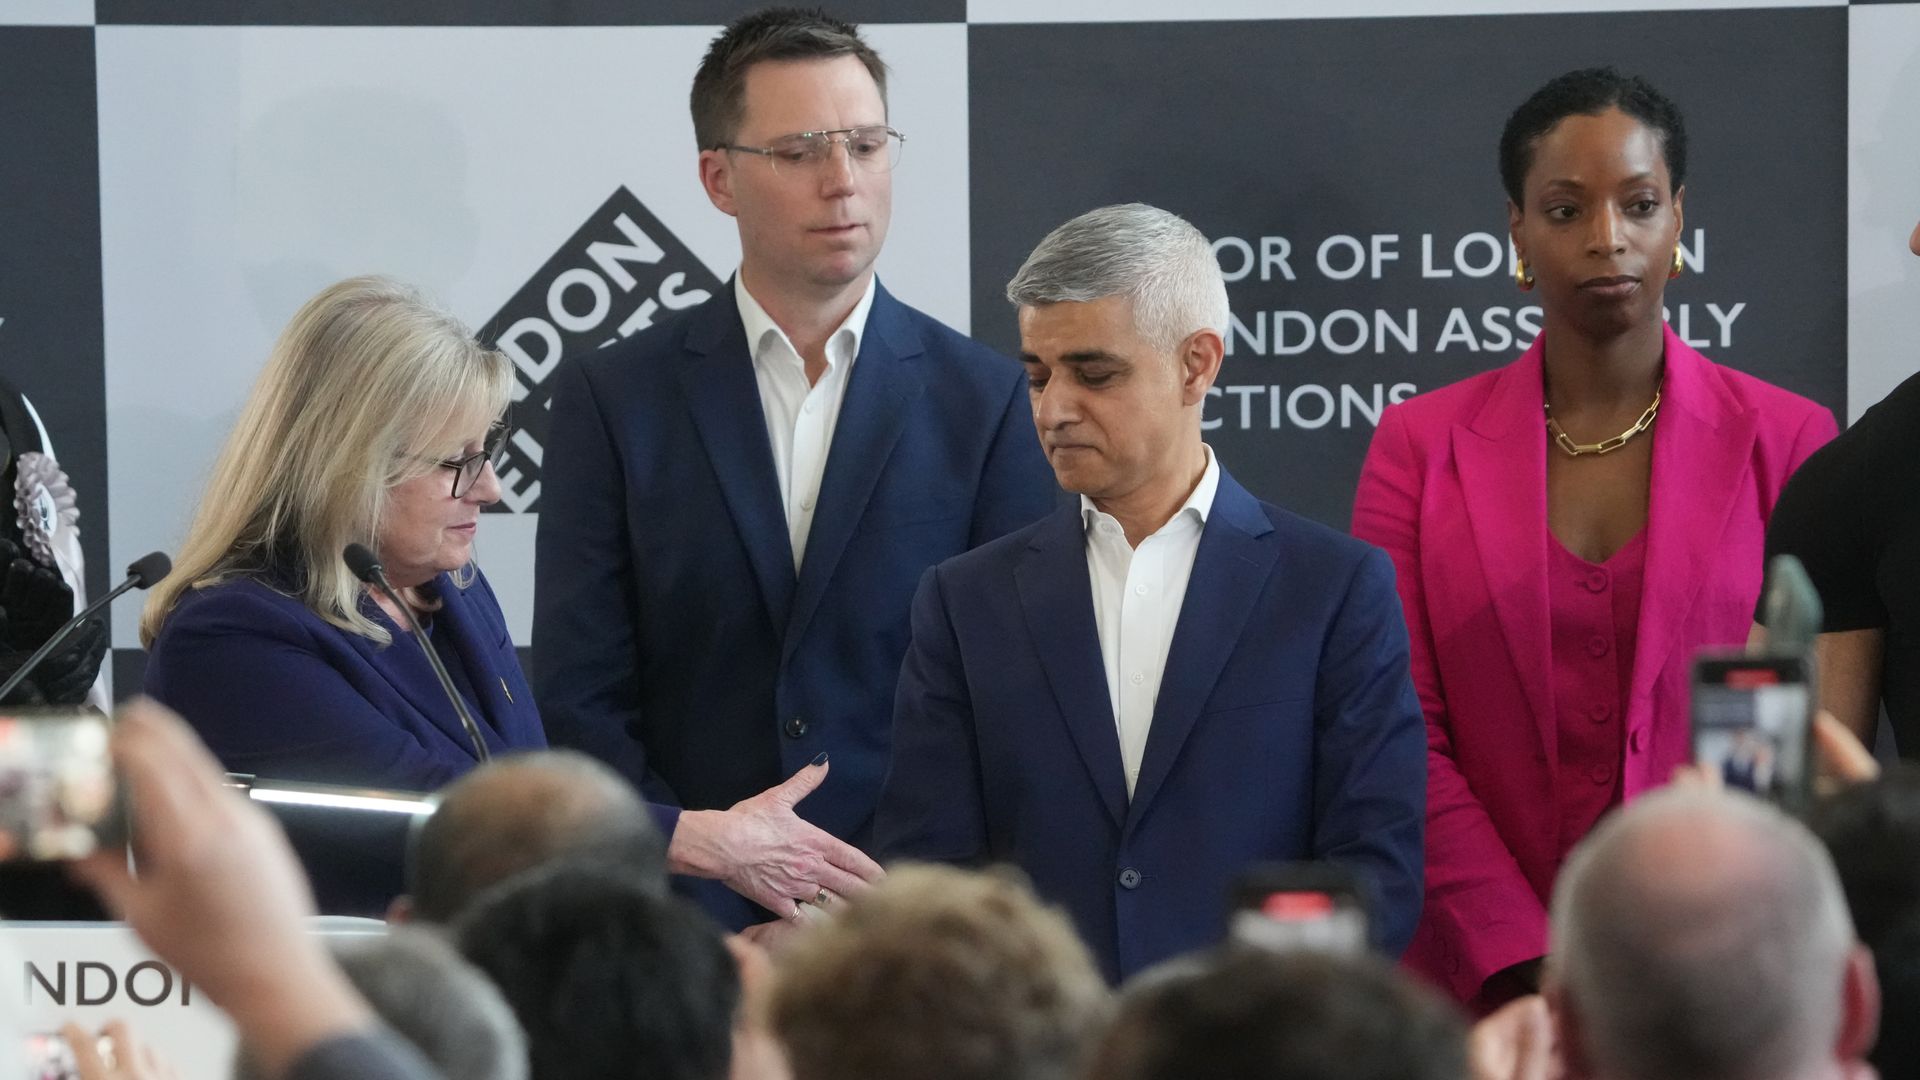 Sadiq Khan secures convincing win over Tory rival in London mayoral race...